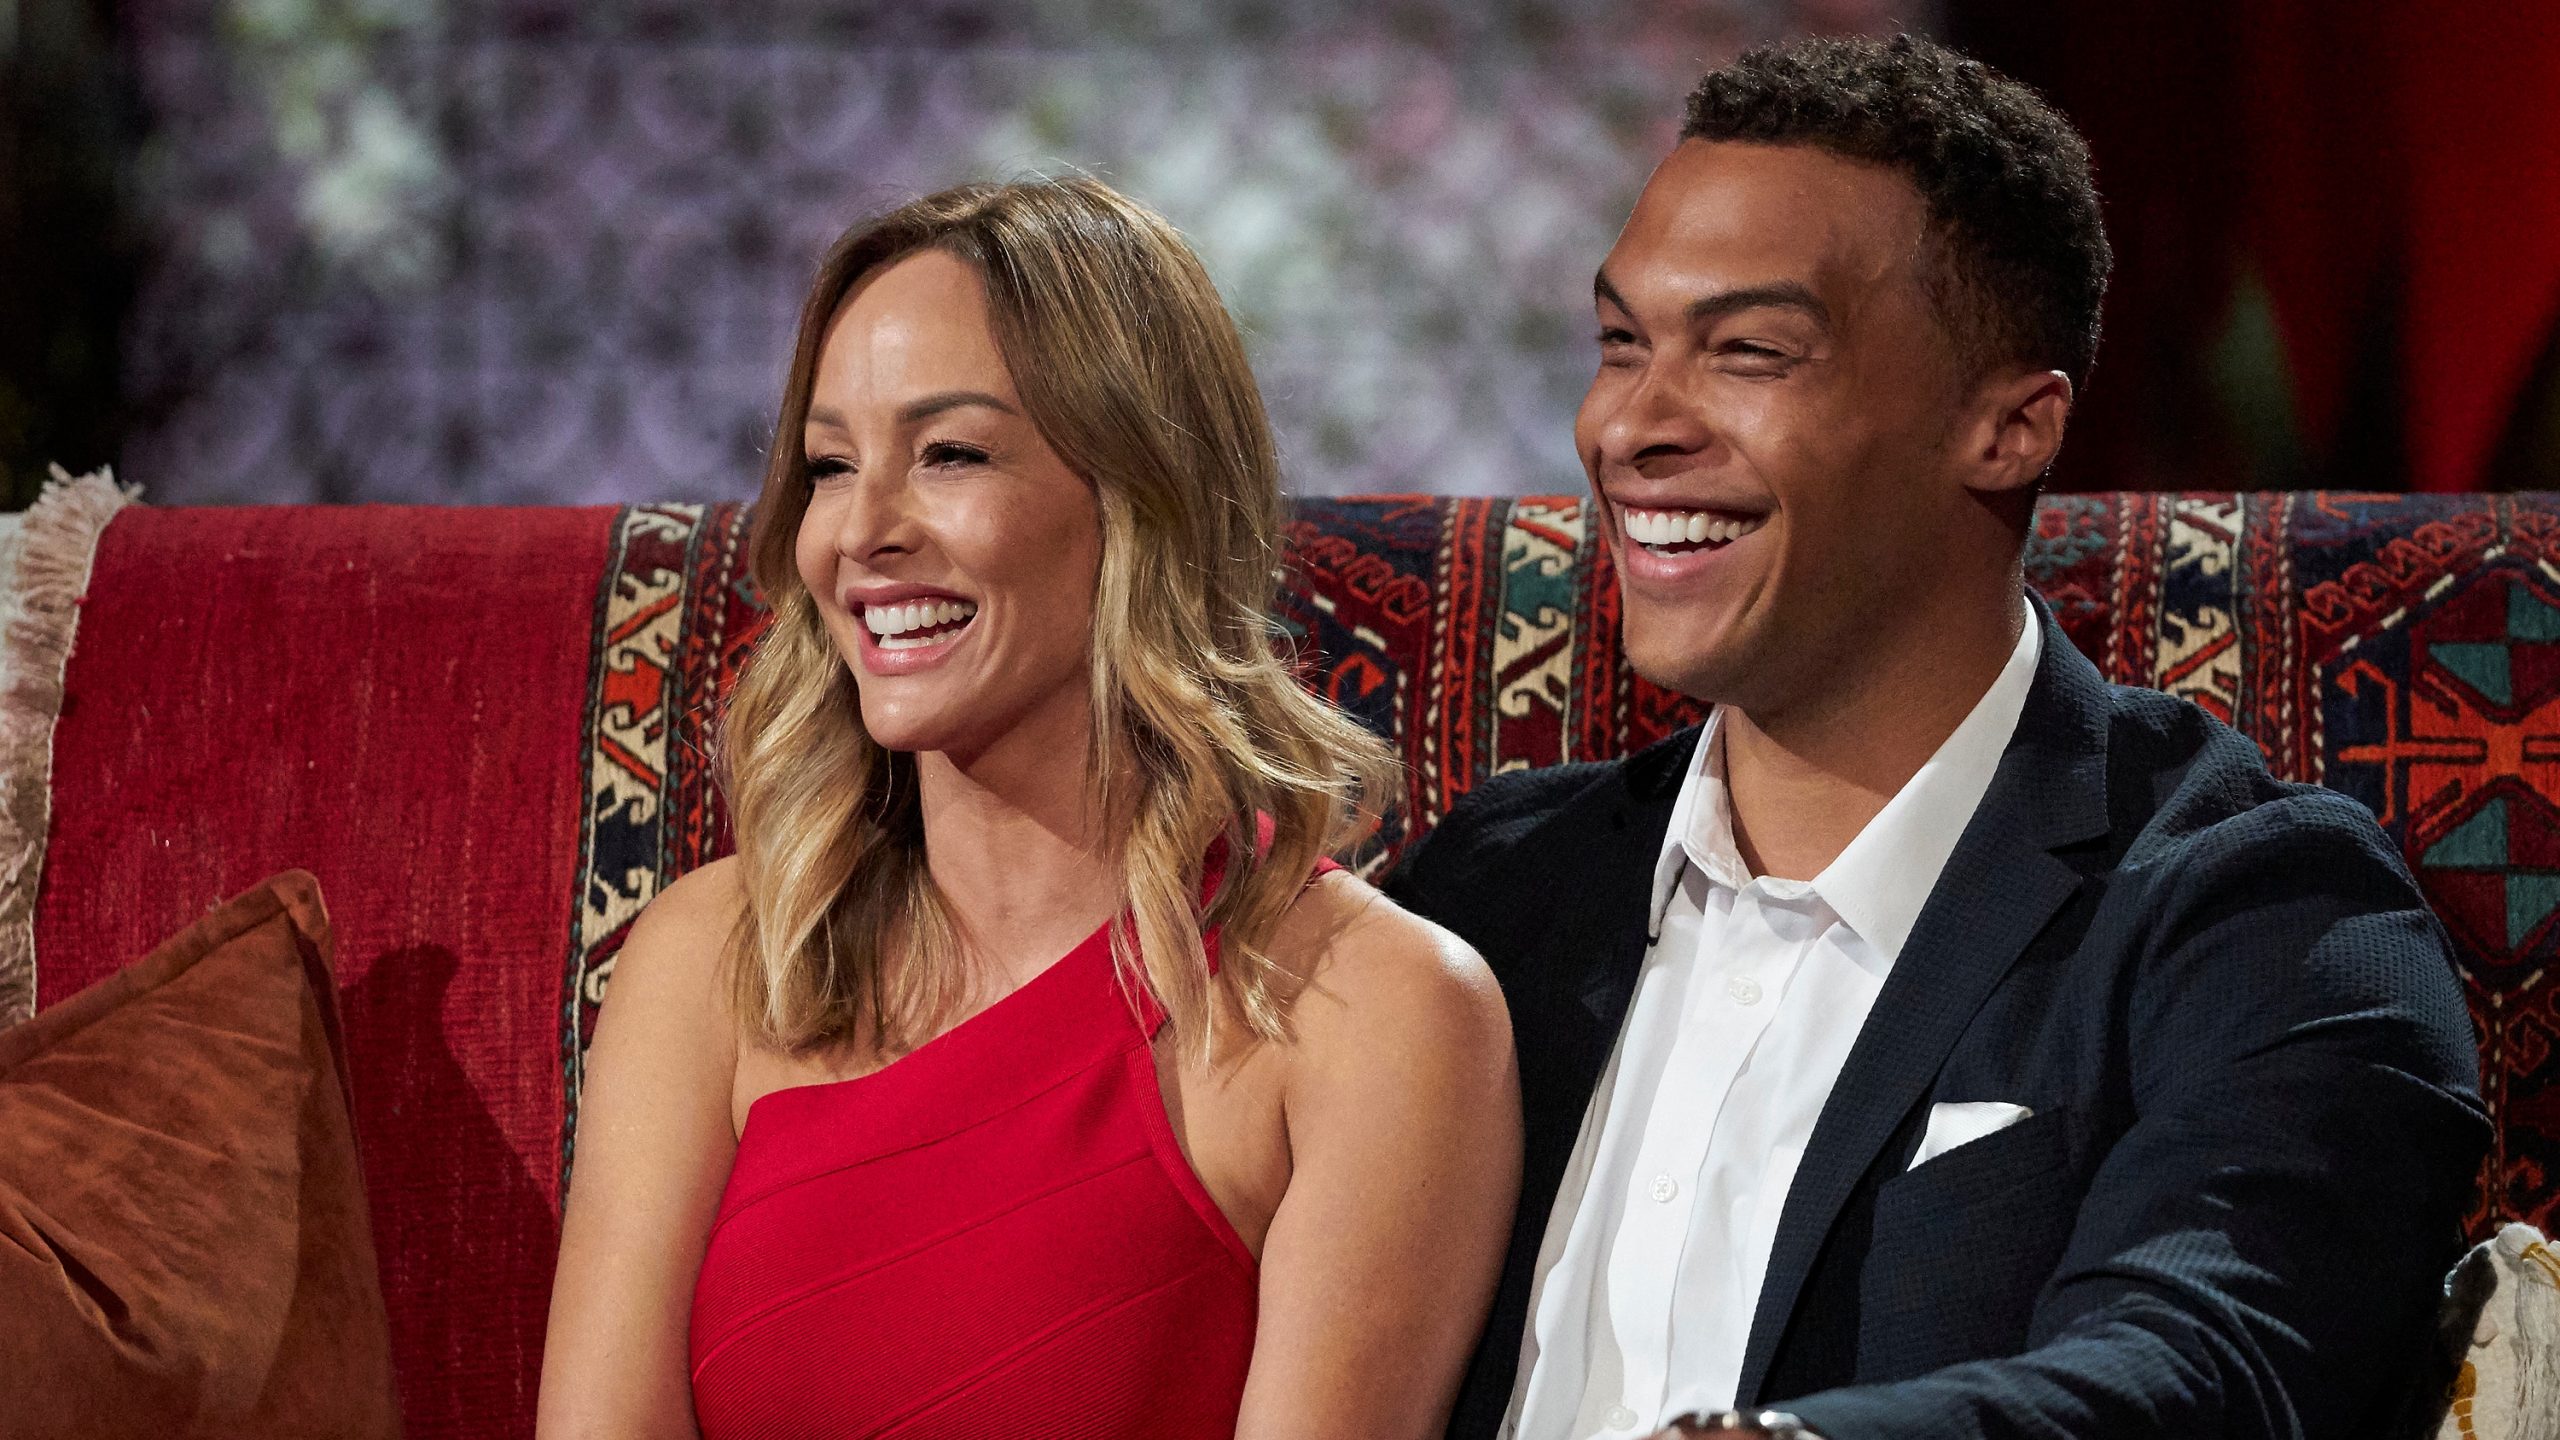 Del Moss opens up to the bachelorette about his split with Claire Crowley: There’s no one to blame